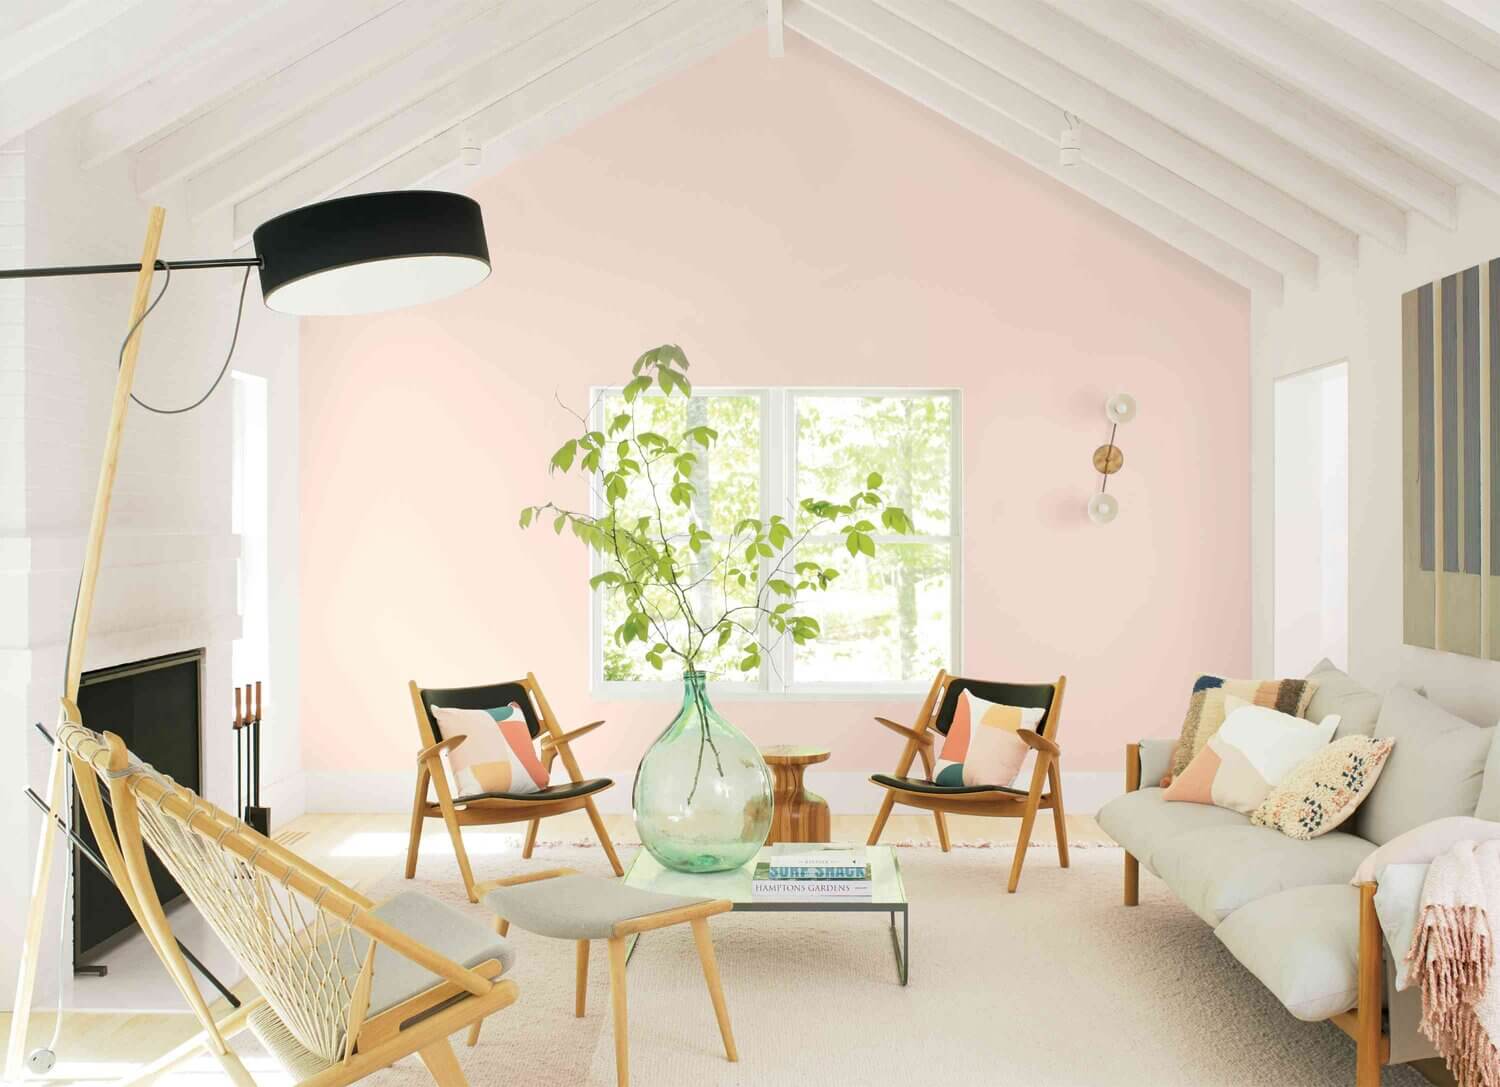 BenjaminMooreColoroftheYear2020FirstLight ColorTrends2020TheNordroom The Color Trends For 2020 Are Inspired by Nature